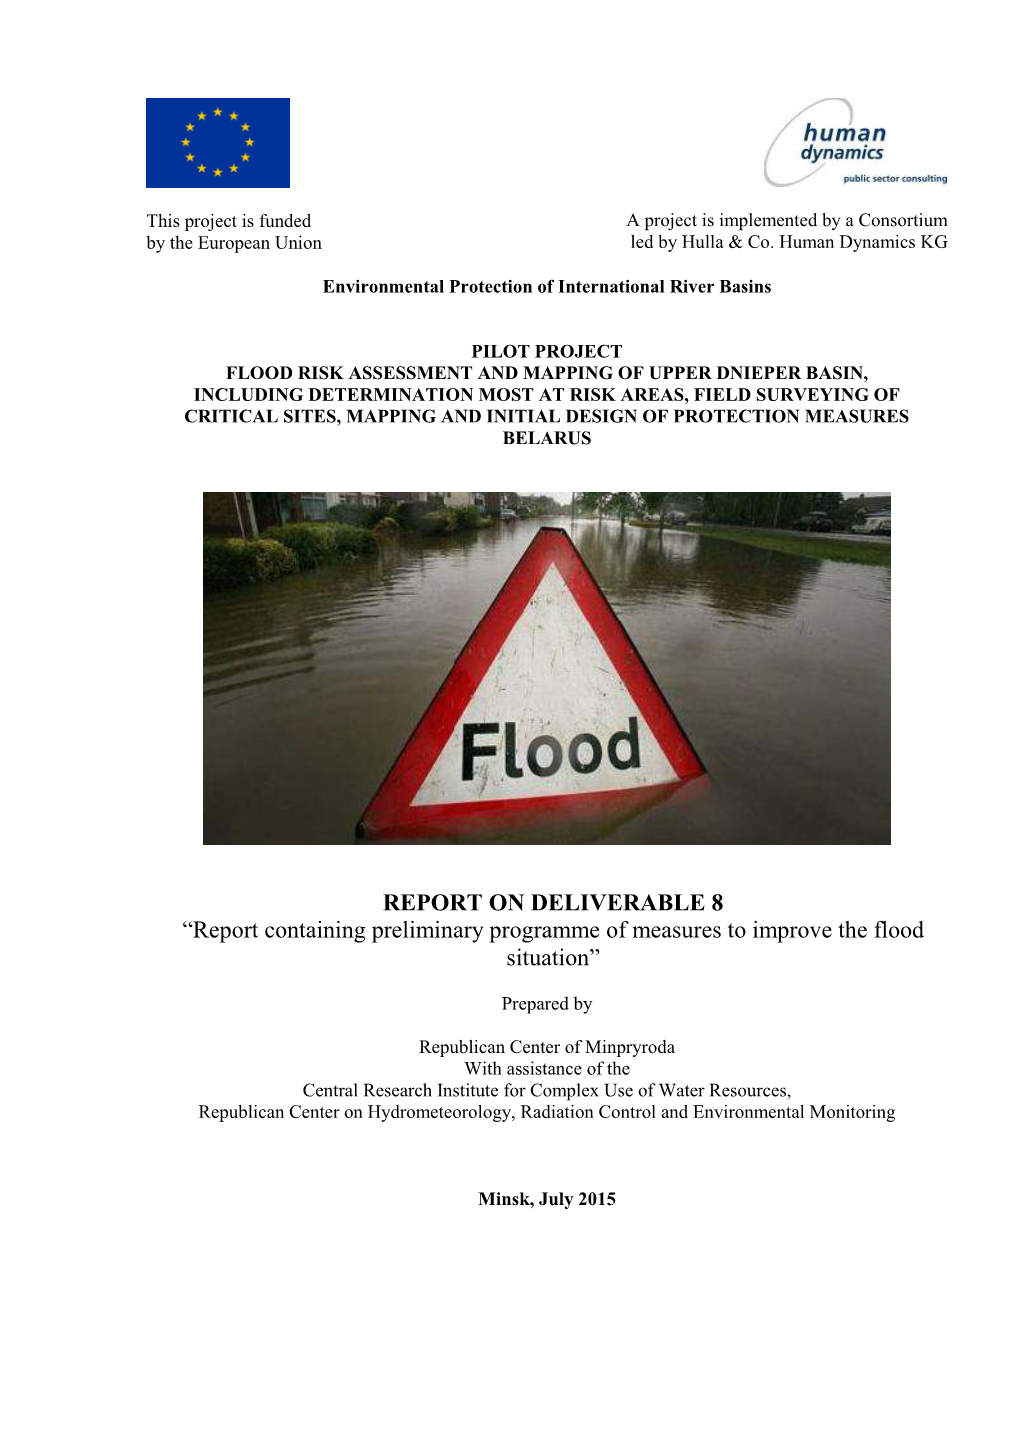 REPORT on DELIVERABLE 8 “Report Containing Preliminary Programme of Measures to Improve the Flood Situation”